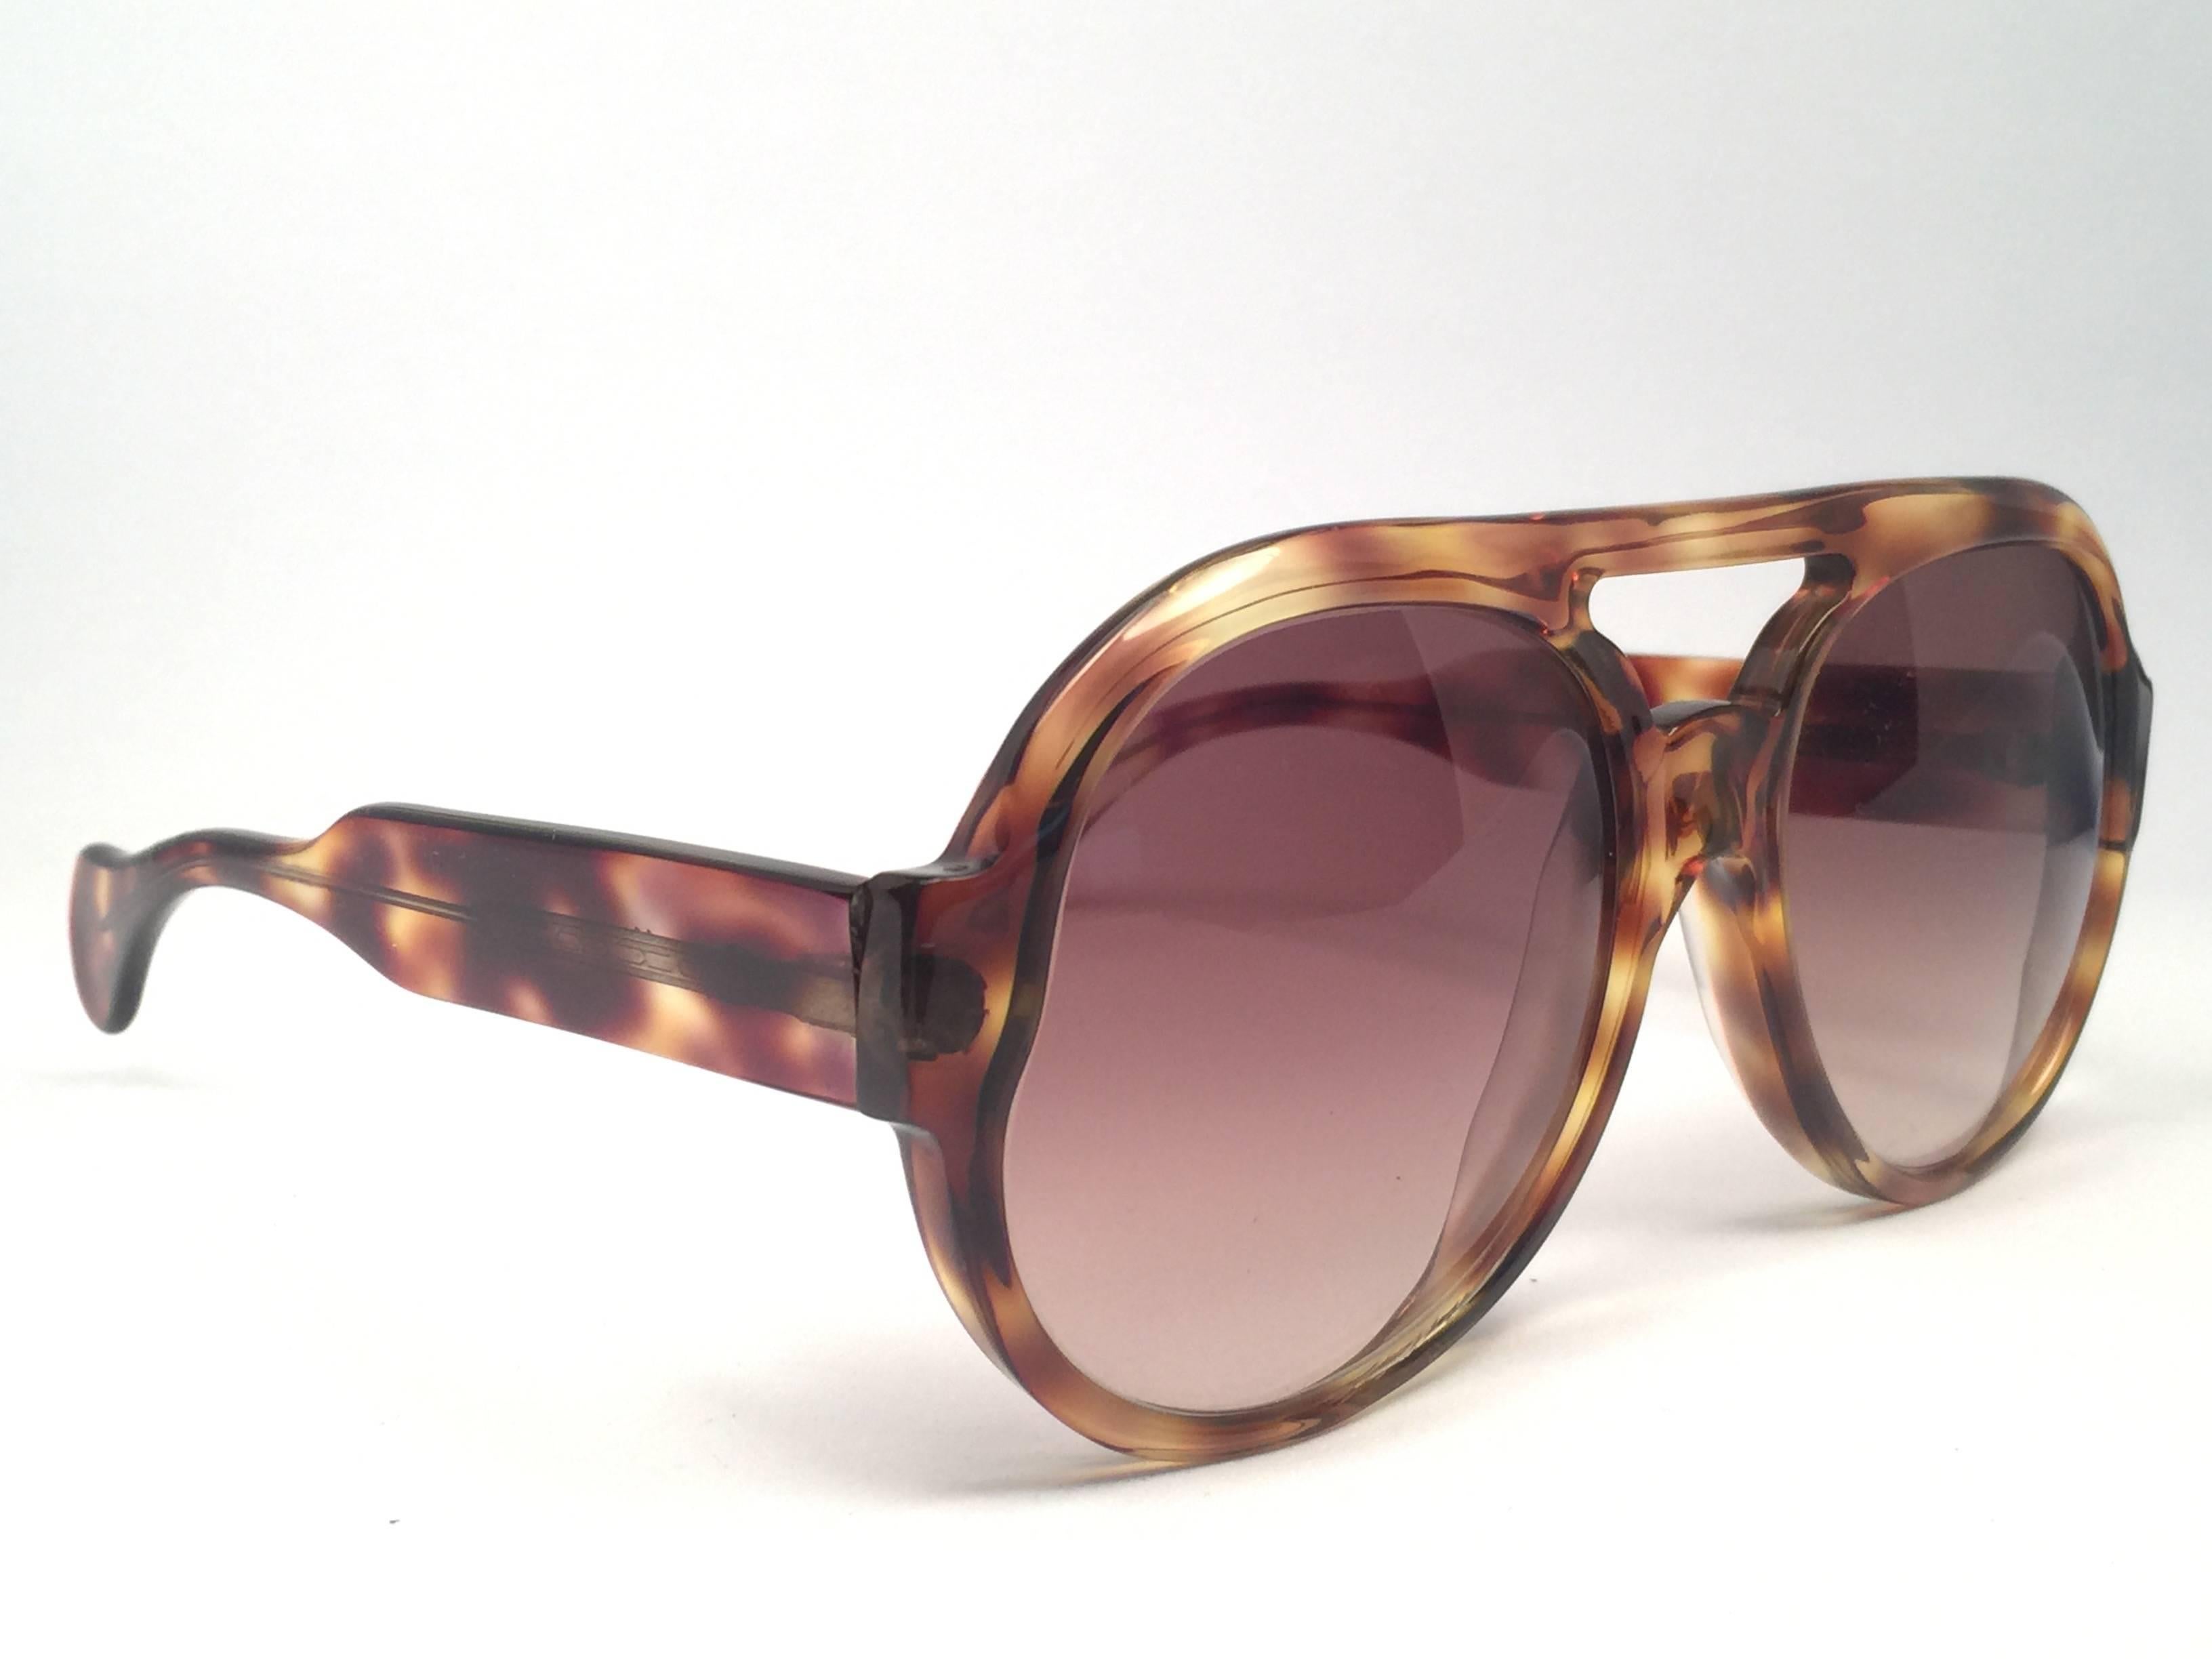 New vintage Serge Kirchhofer sunglasses. 

Spotles lenses.

This item may show sign of wear due to storage.

Made in Austria